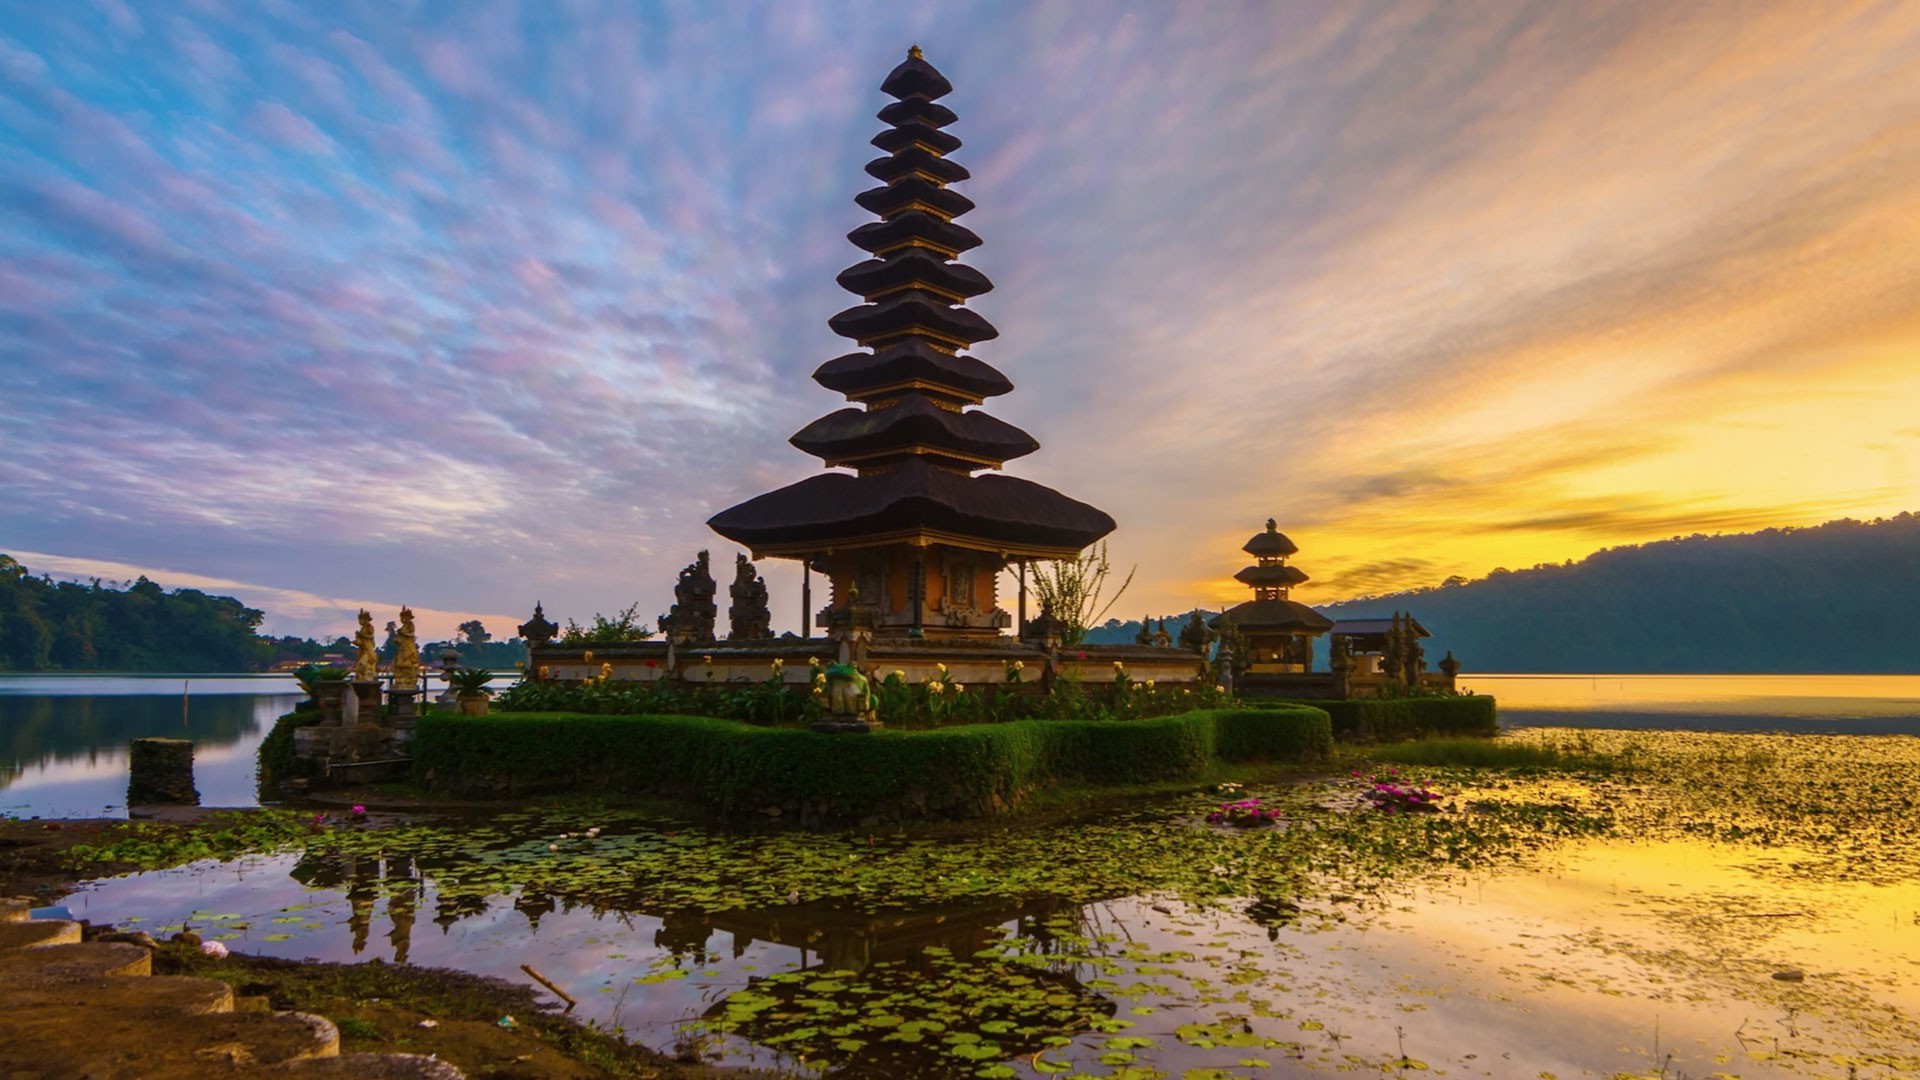 Temple, Bali, Indonesia, Island, Water, Lake, Plants, Sunset, Trees, Forest...